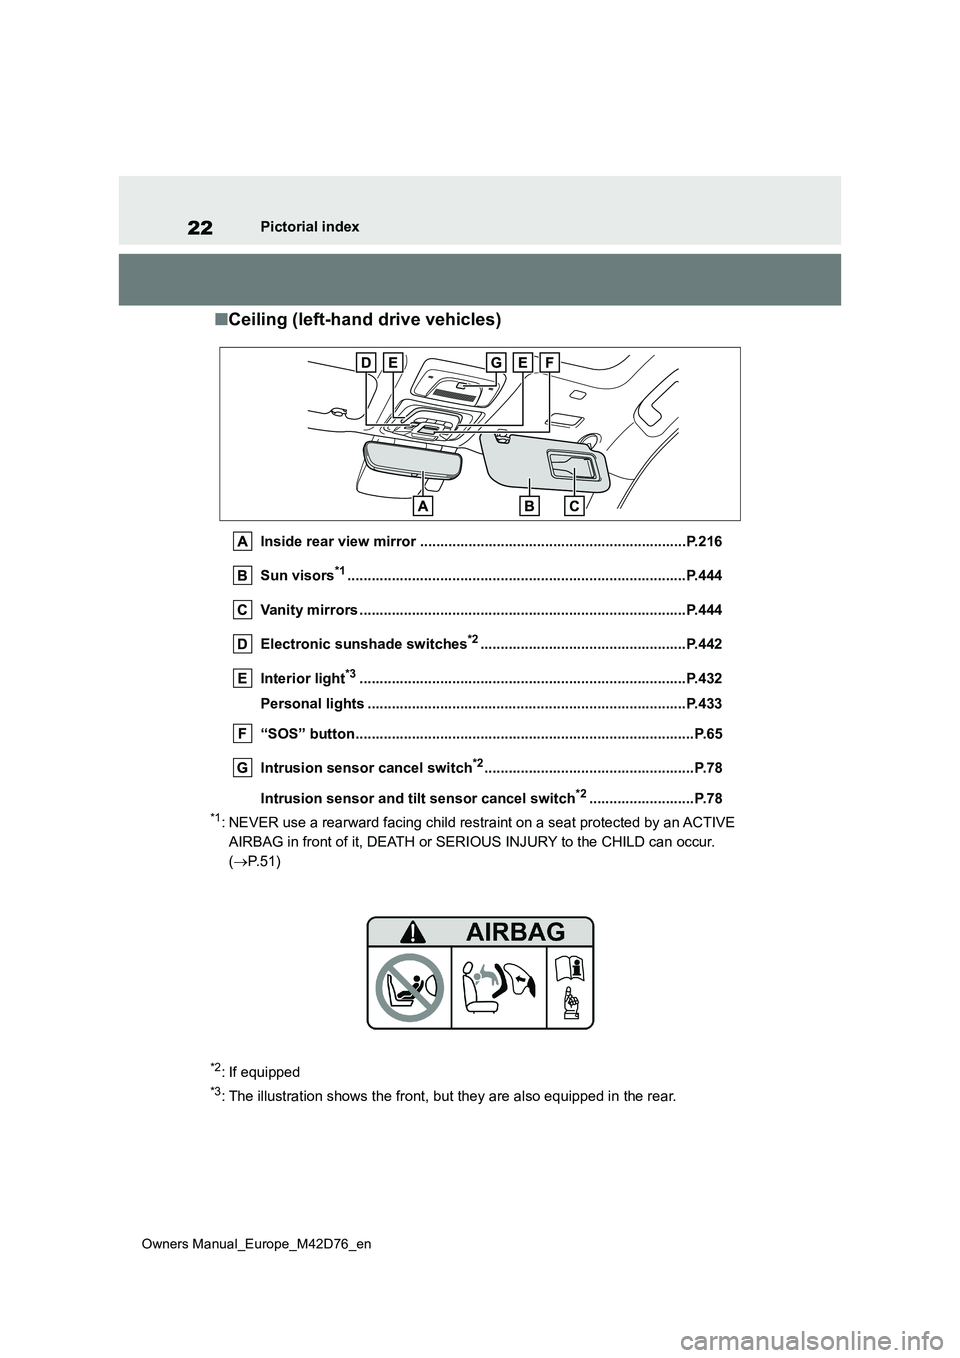 TOYOTA BZ4X 2022  Owners Manual (in English) 22
Owners Manual_Europe_M42D76_en
Pictorial index
■Ceiling (left-hand drive vehicles)
Inside rear view mirror ..................................................................P.216 
Sun visors*1...